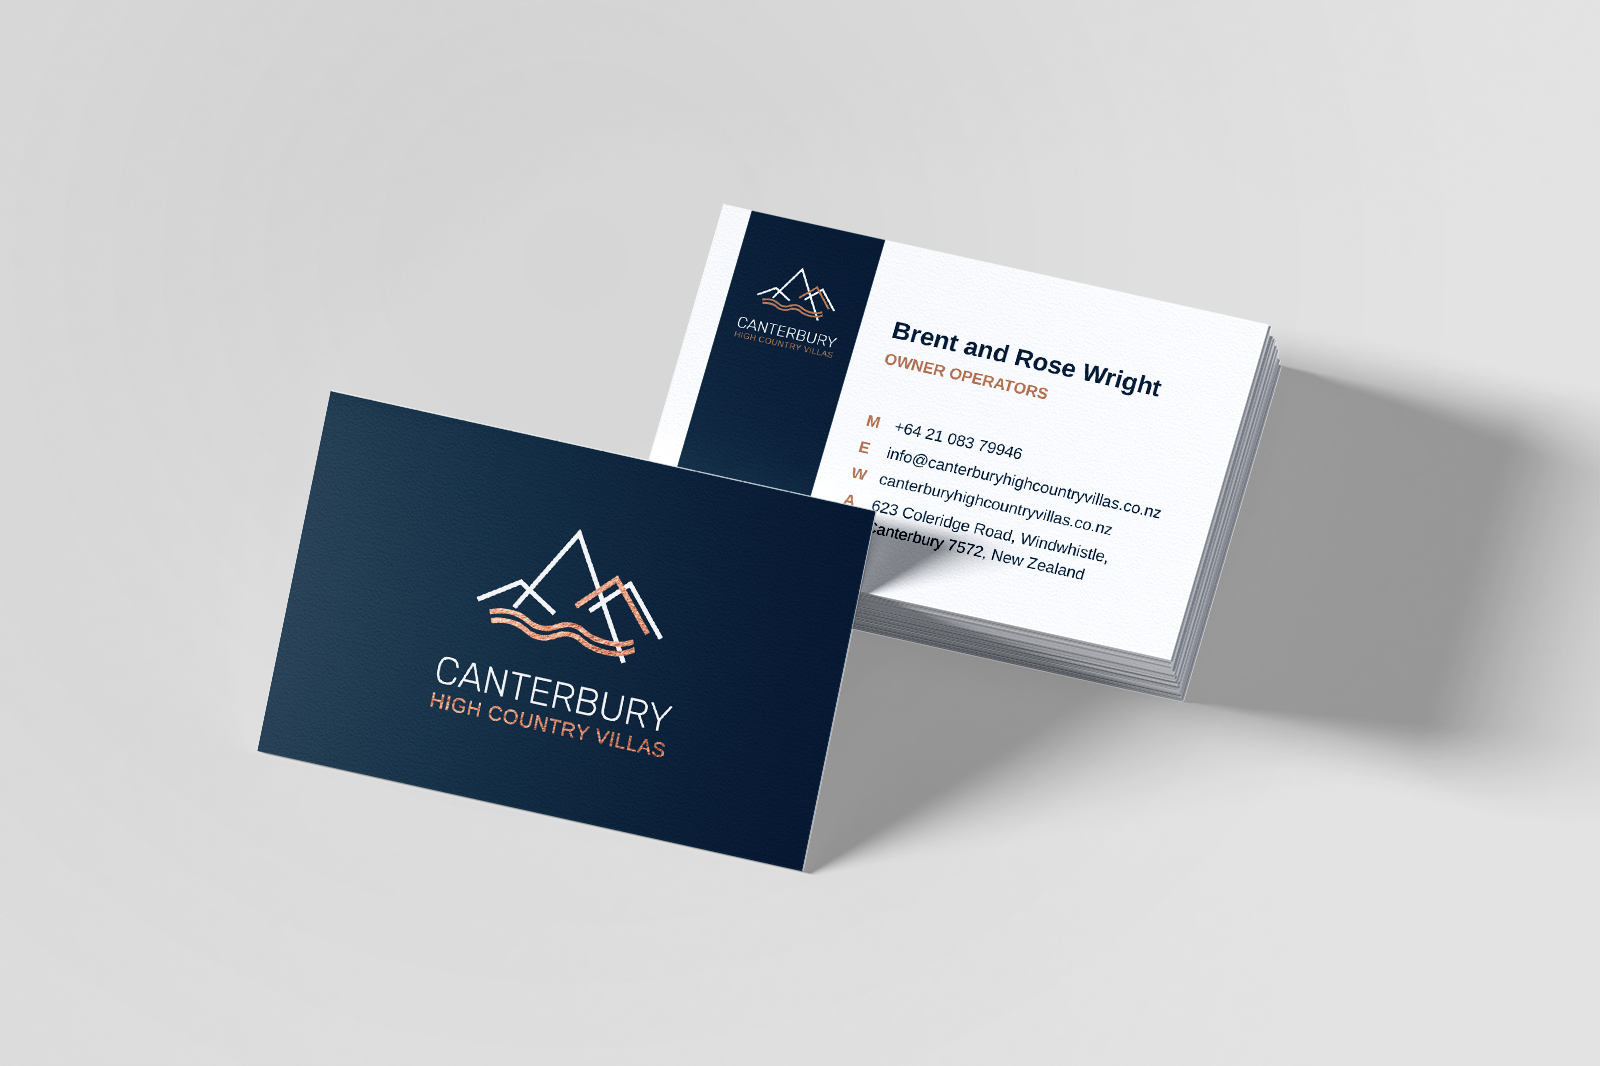 Canterbury Villas Brand Identity Design and Print Design by Oath Creative - Business Cards